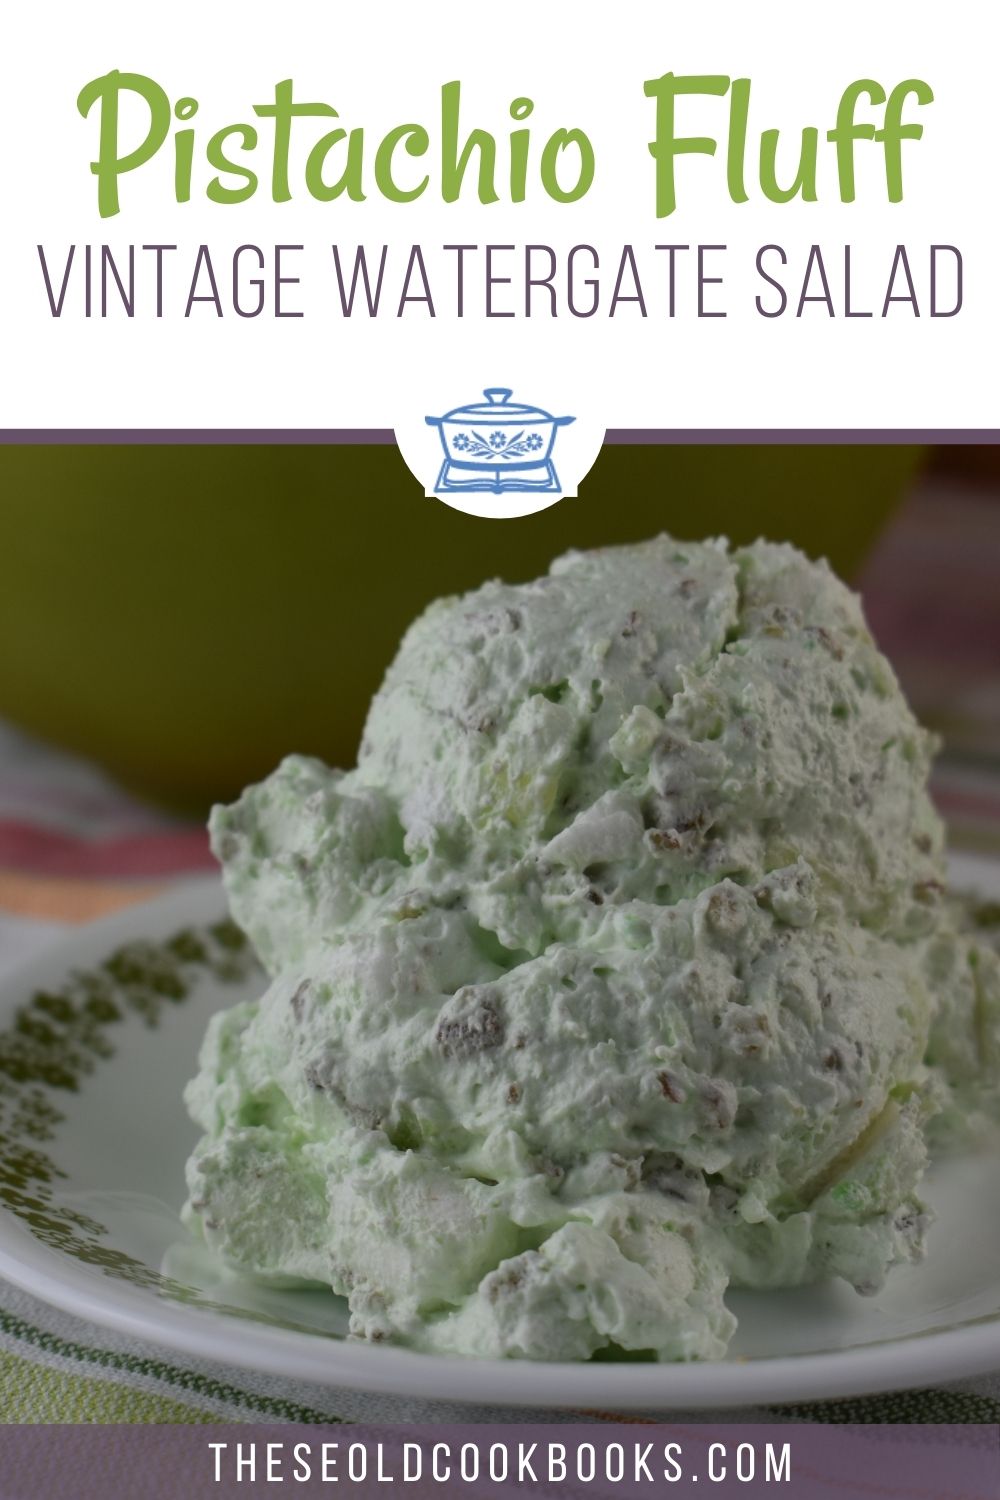 Watergate Salad Recipe with Pudding - These Old Cookbooks